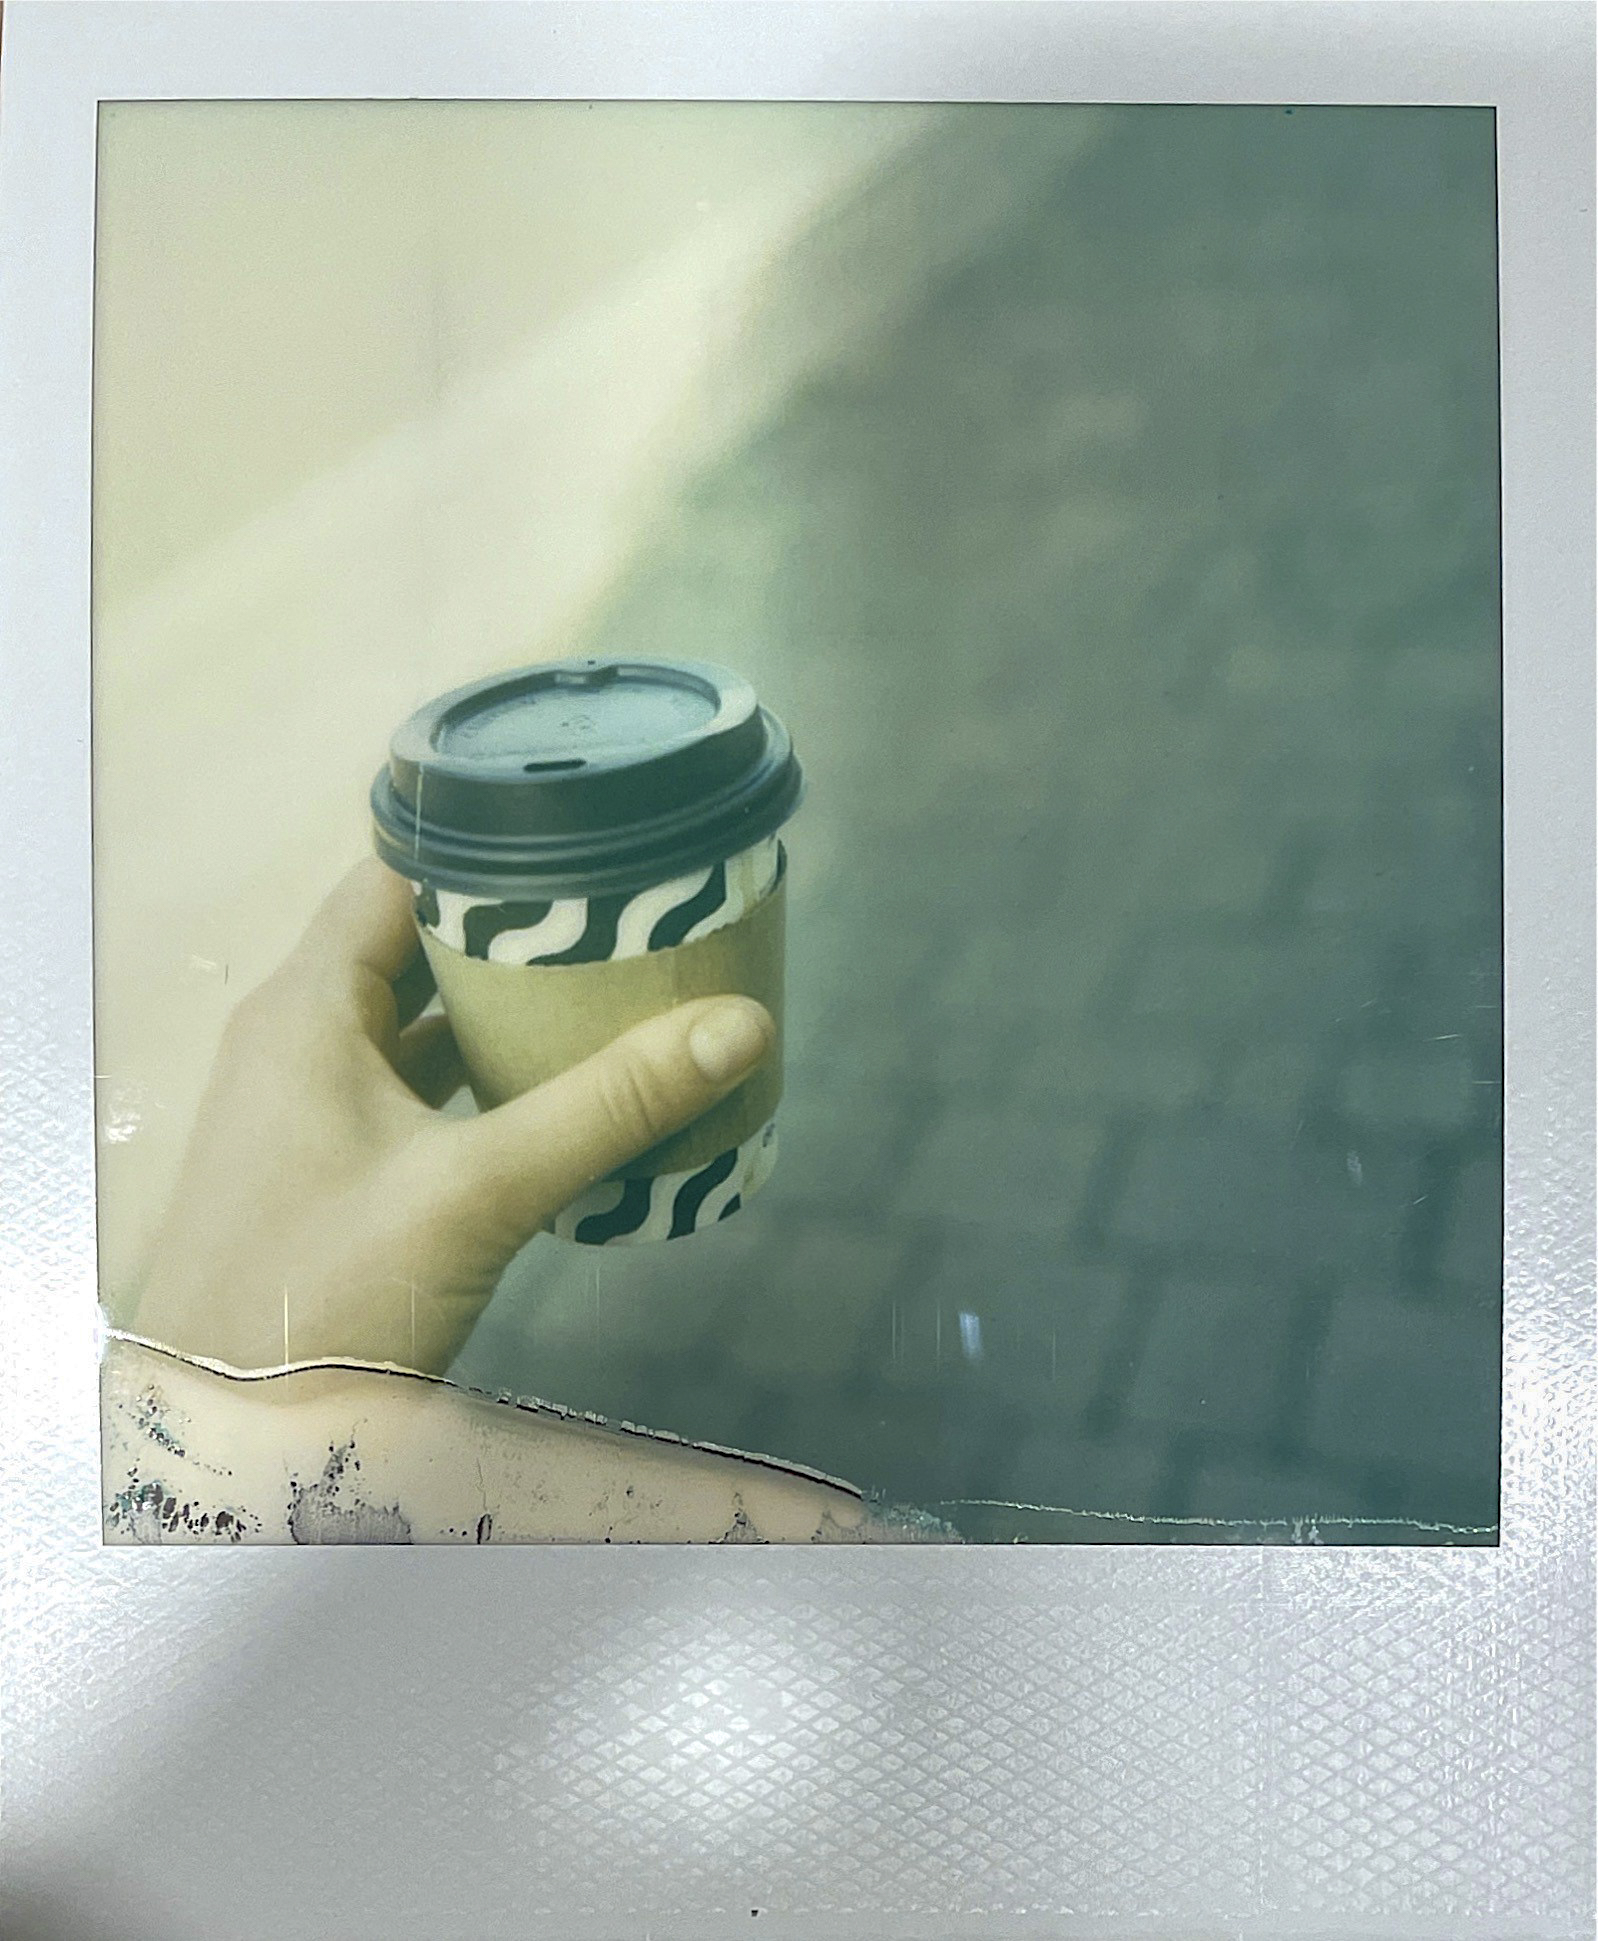 Do you even own a Polaroid if you don’t take a snap of your hipster coffee?